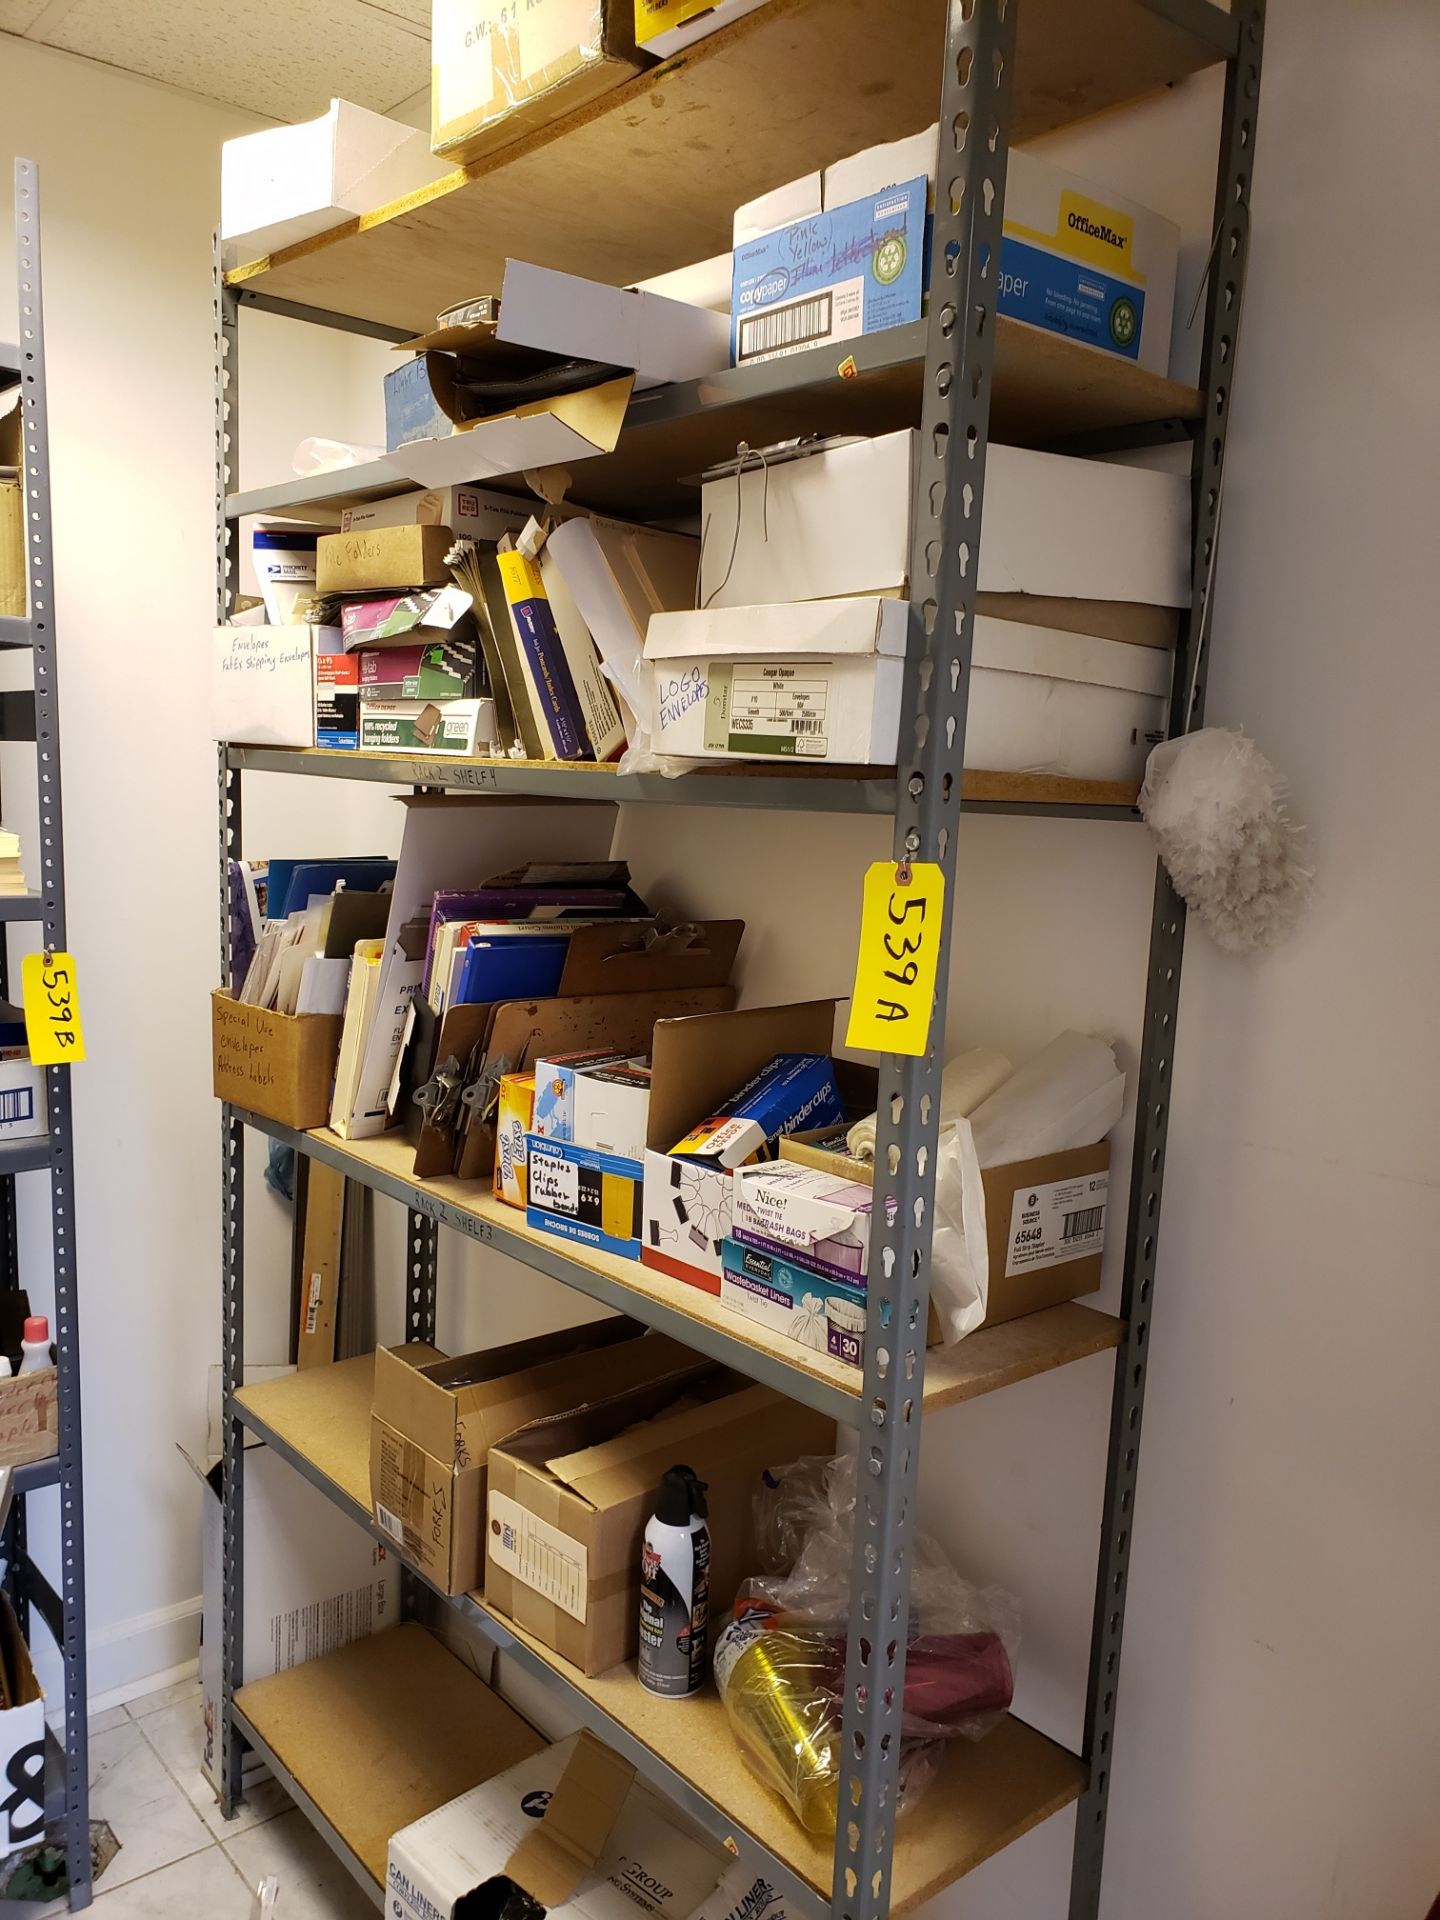 SHELVING UNIT: 48" X 12" X 72" WITH ASSORTED OFFICE SUPPLIES